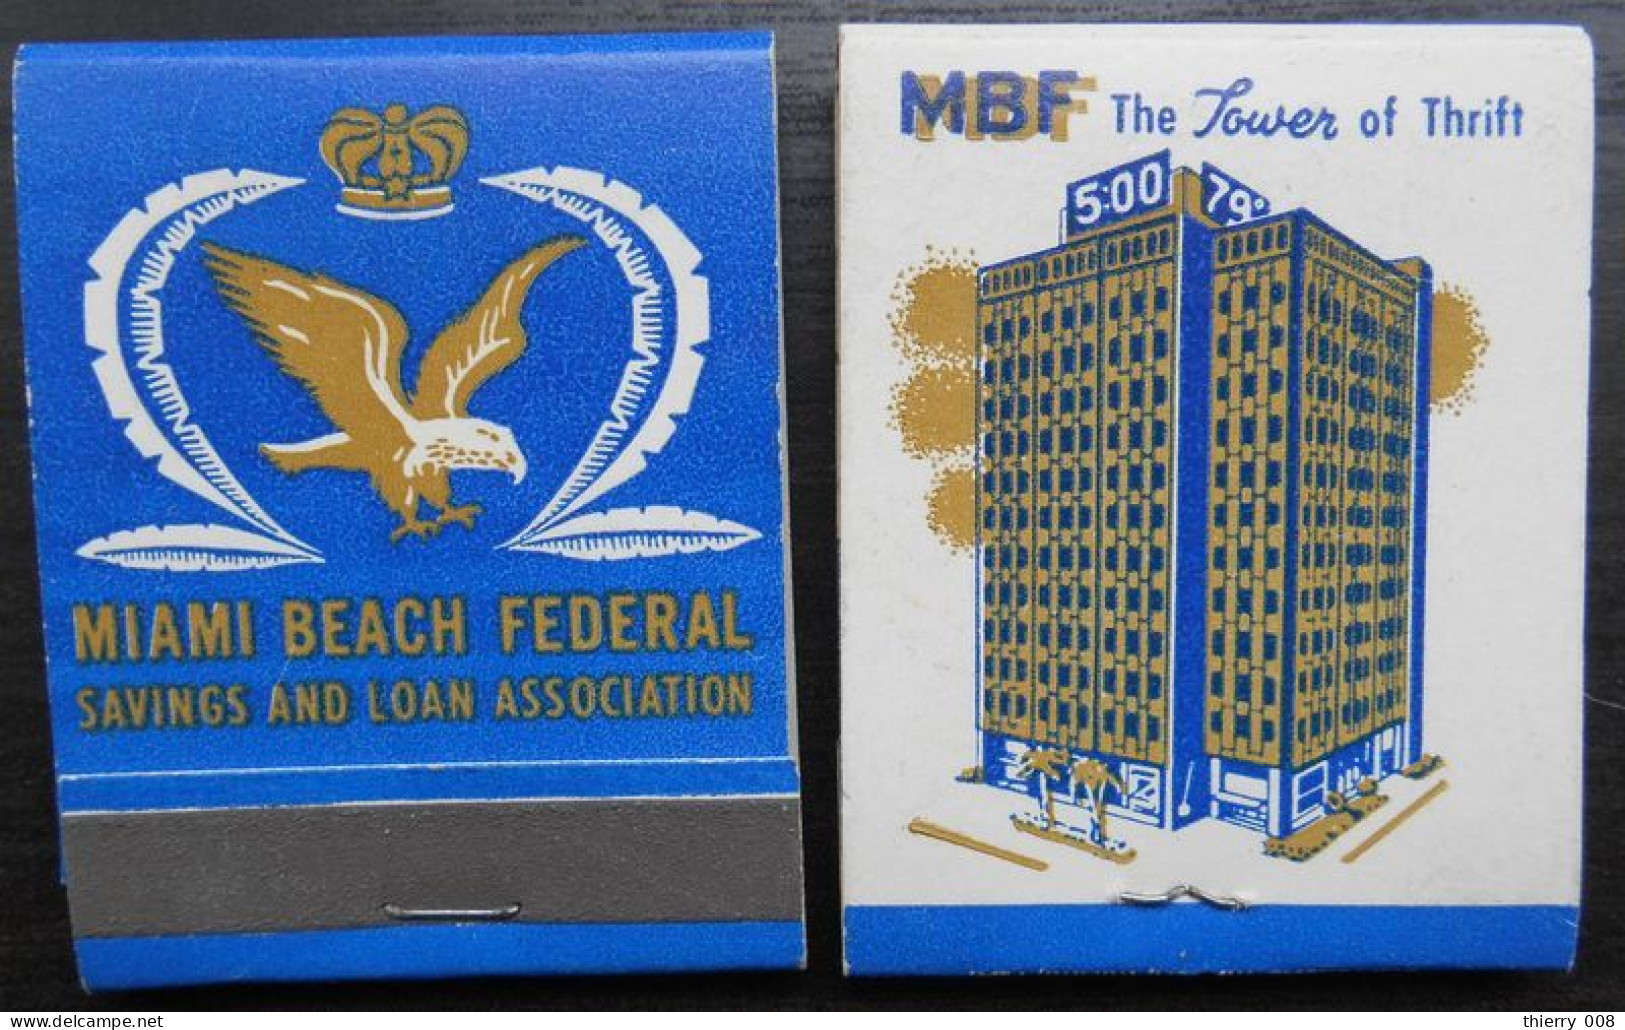 Pochette Allumettes Miami Beach Federal Savings And Loan Association MBF The Lover Of Thrift - Matchboxes